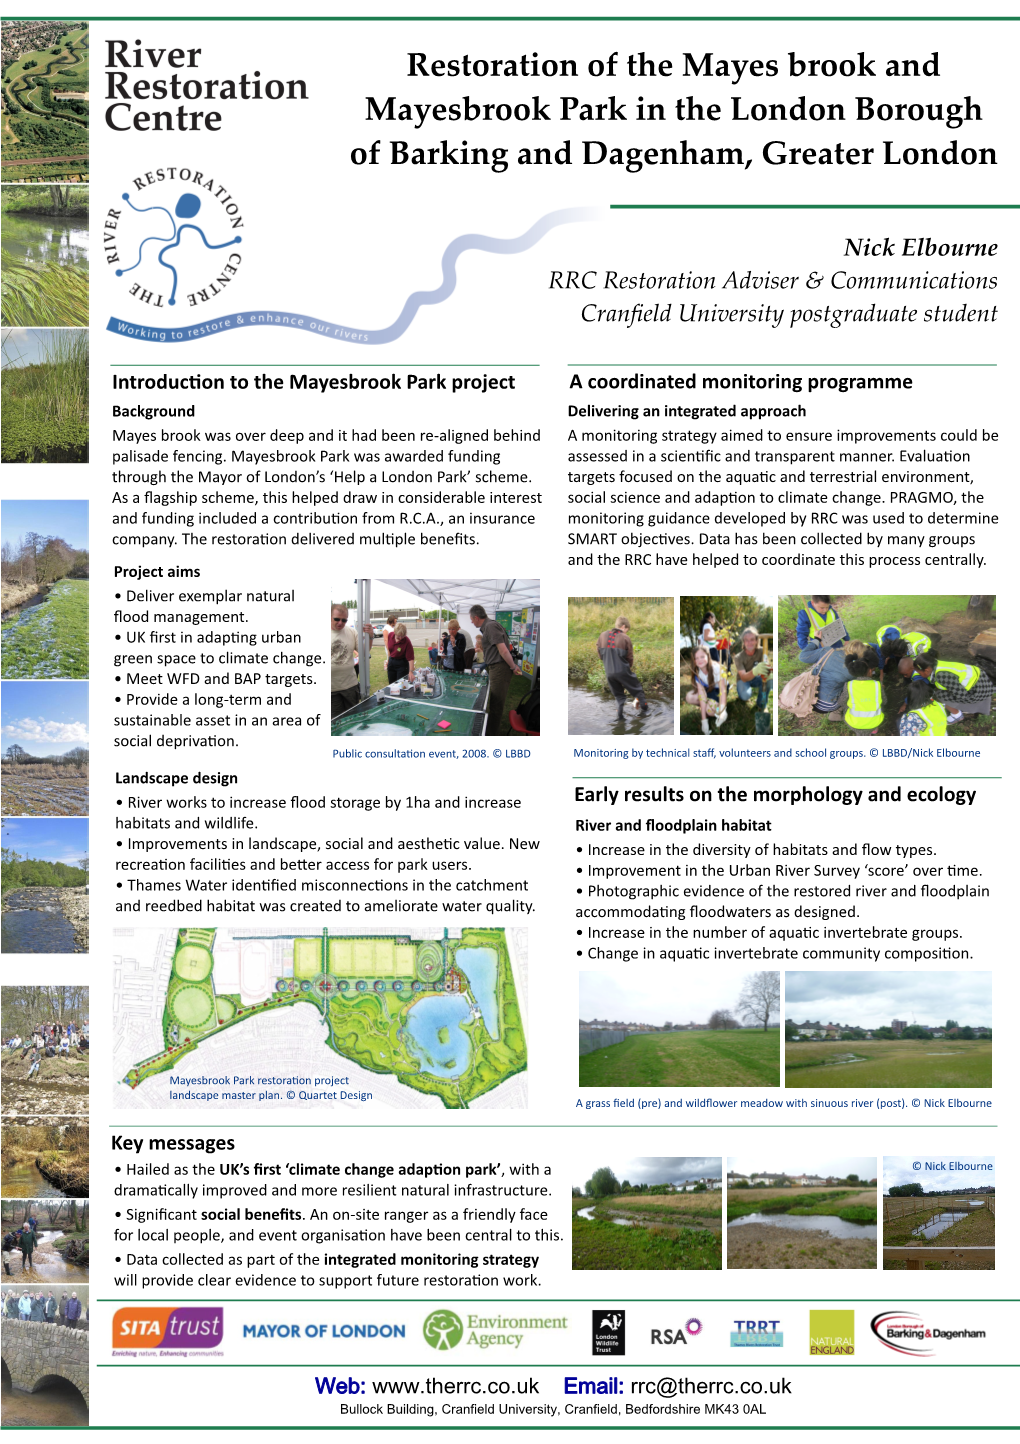 Restoration of the Mayes Brook and Mayesbrook Park in the London Borough of Barking and Dagenham, Greater London